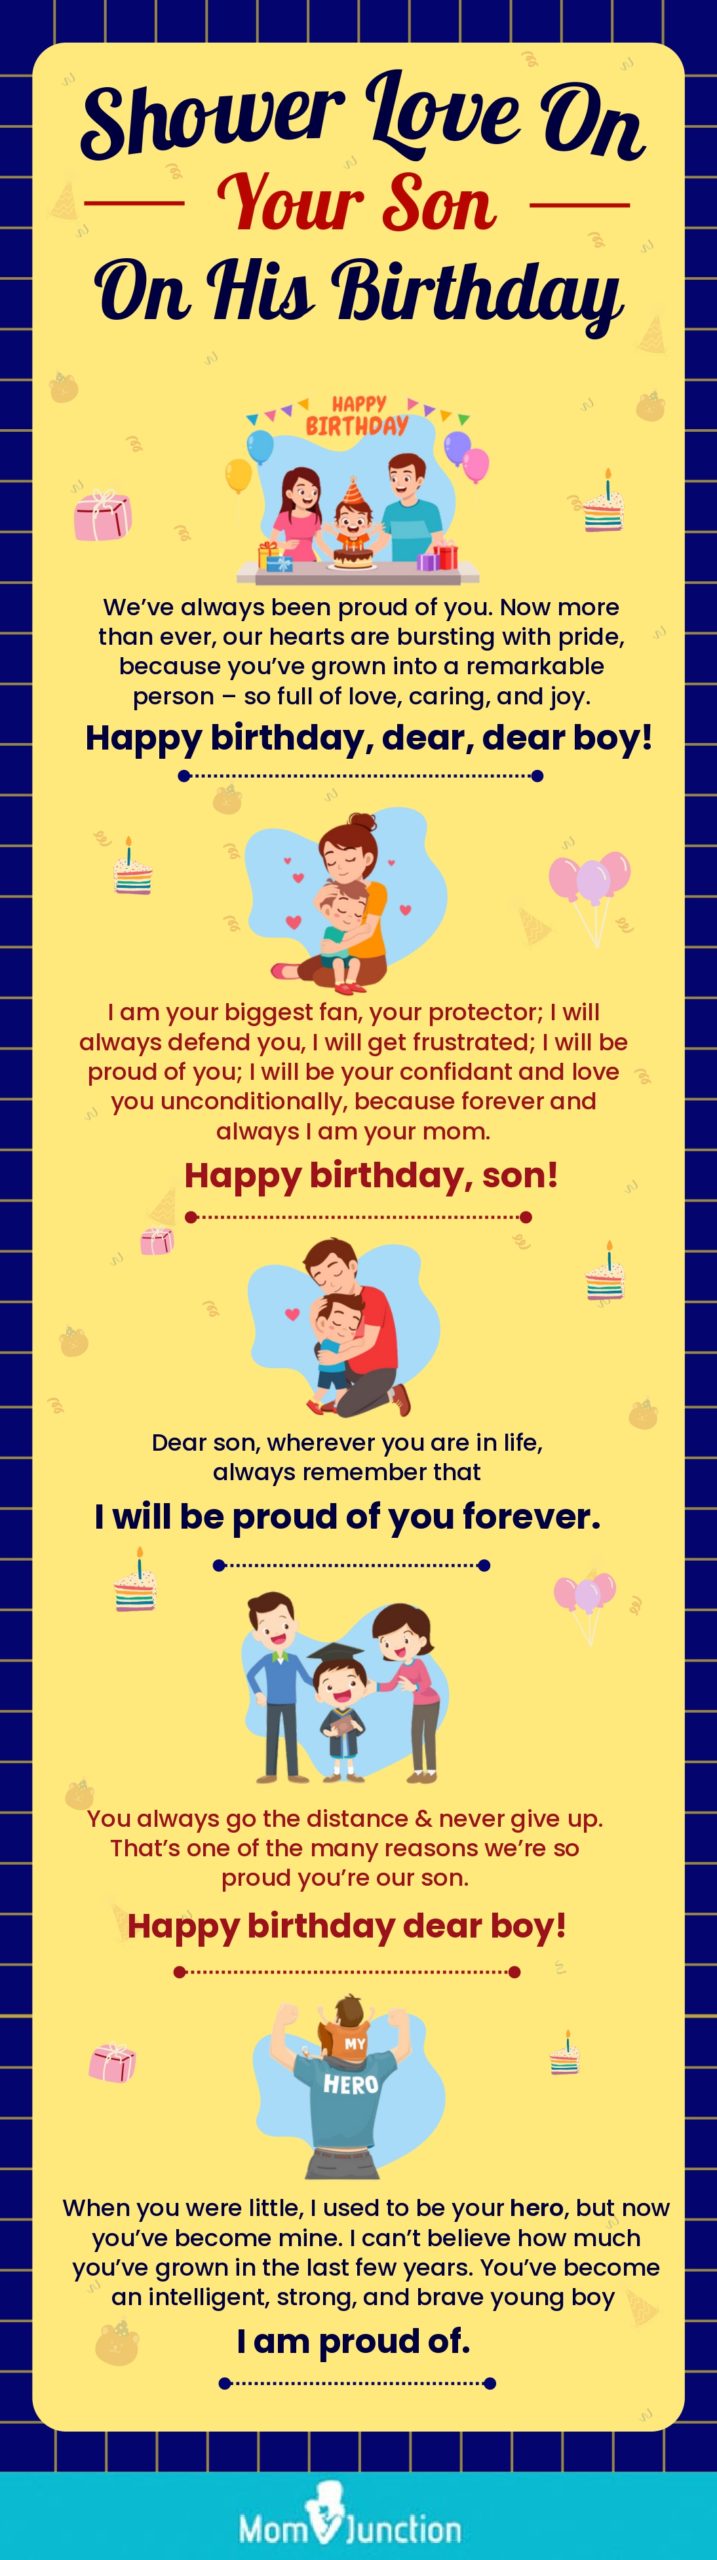 shower love on your son on his birthday [infographic]